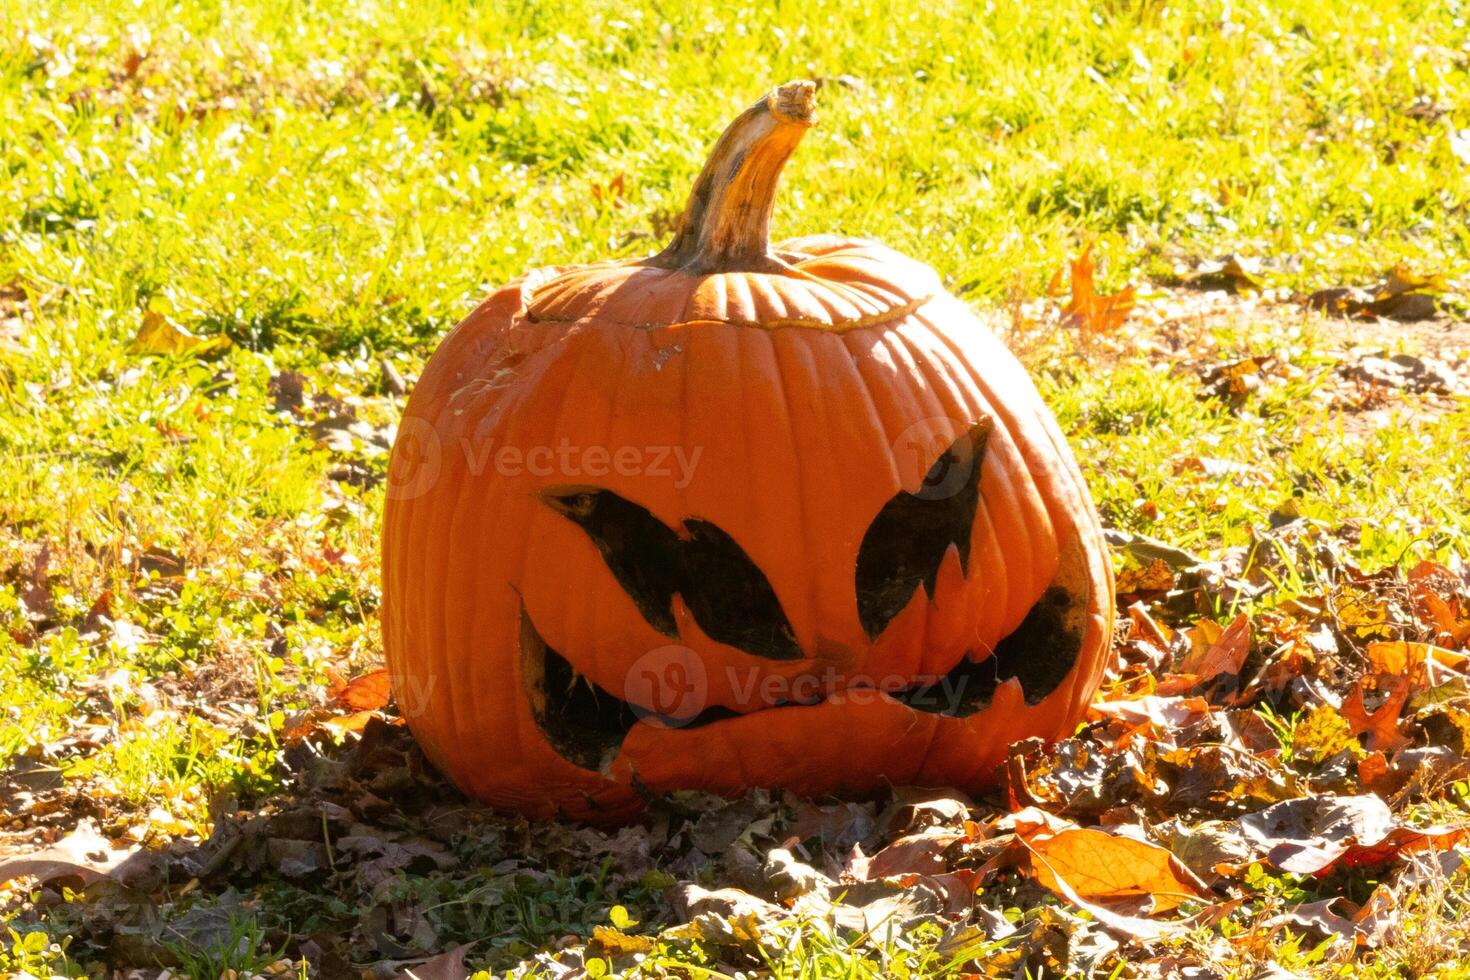 This beautiful pumpkin sits in the grass rotting from the Halloween season. The big orange gourd has a scary face carved in which makes it a Jack O Lantern. photo